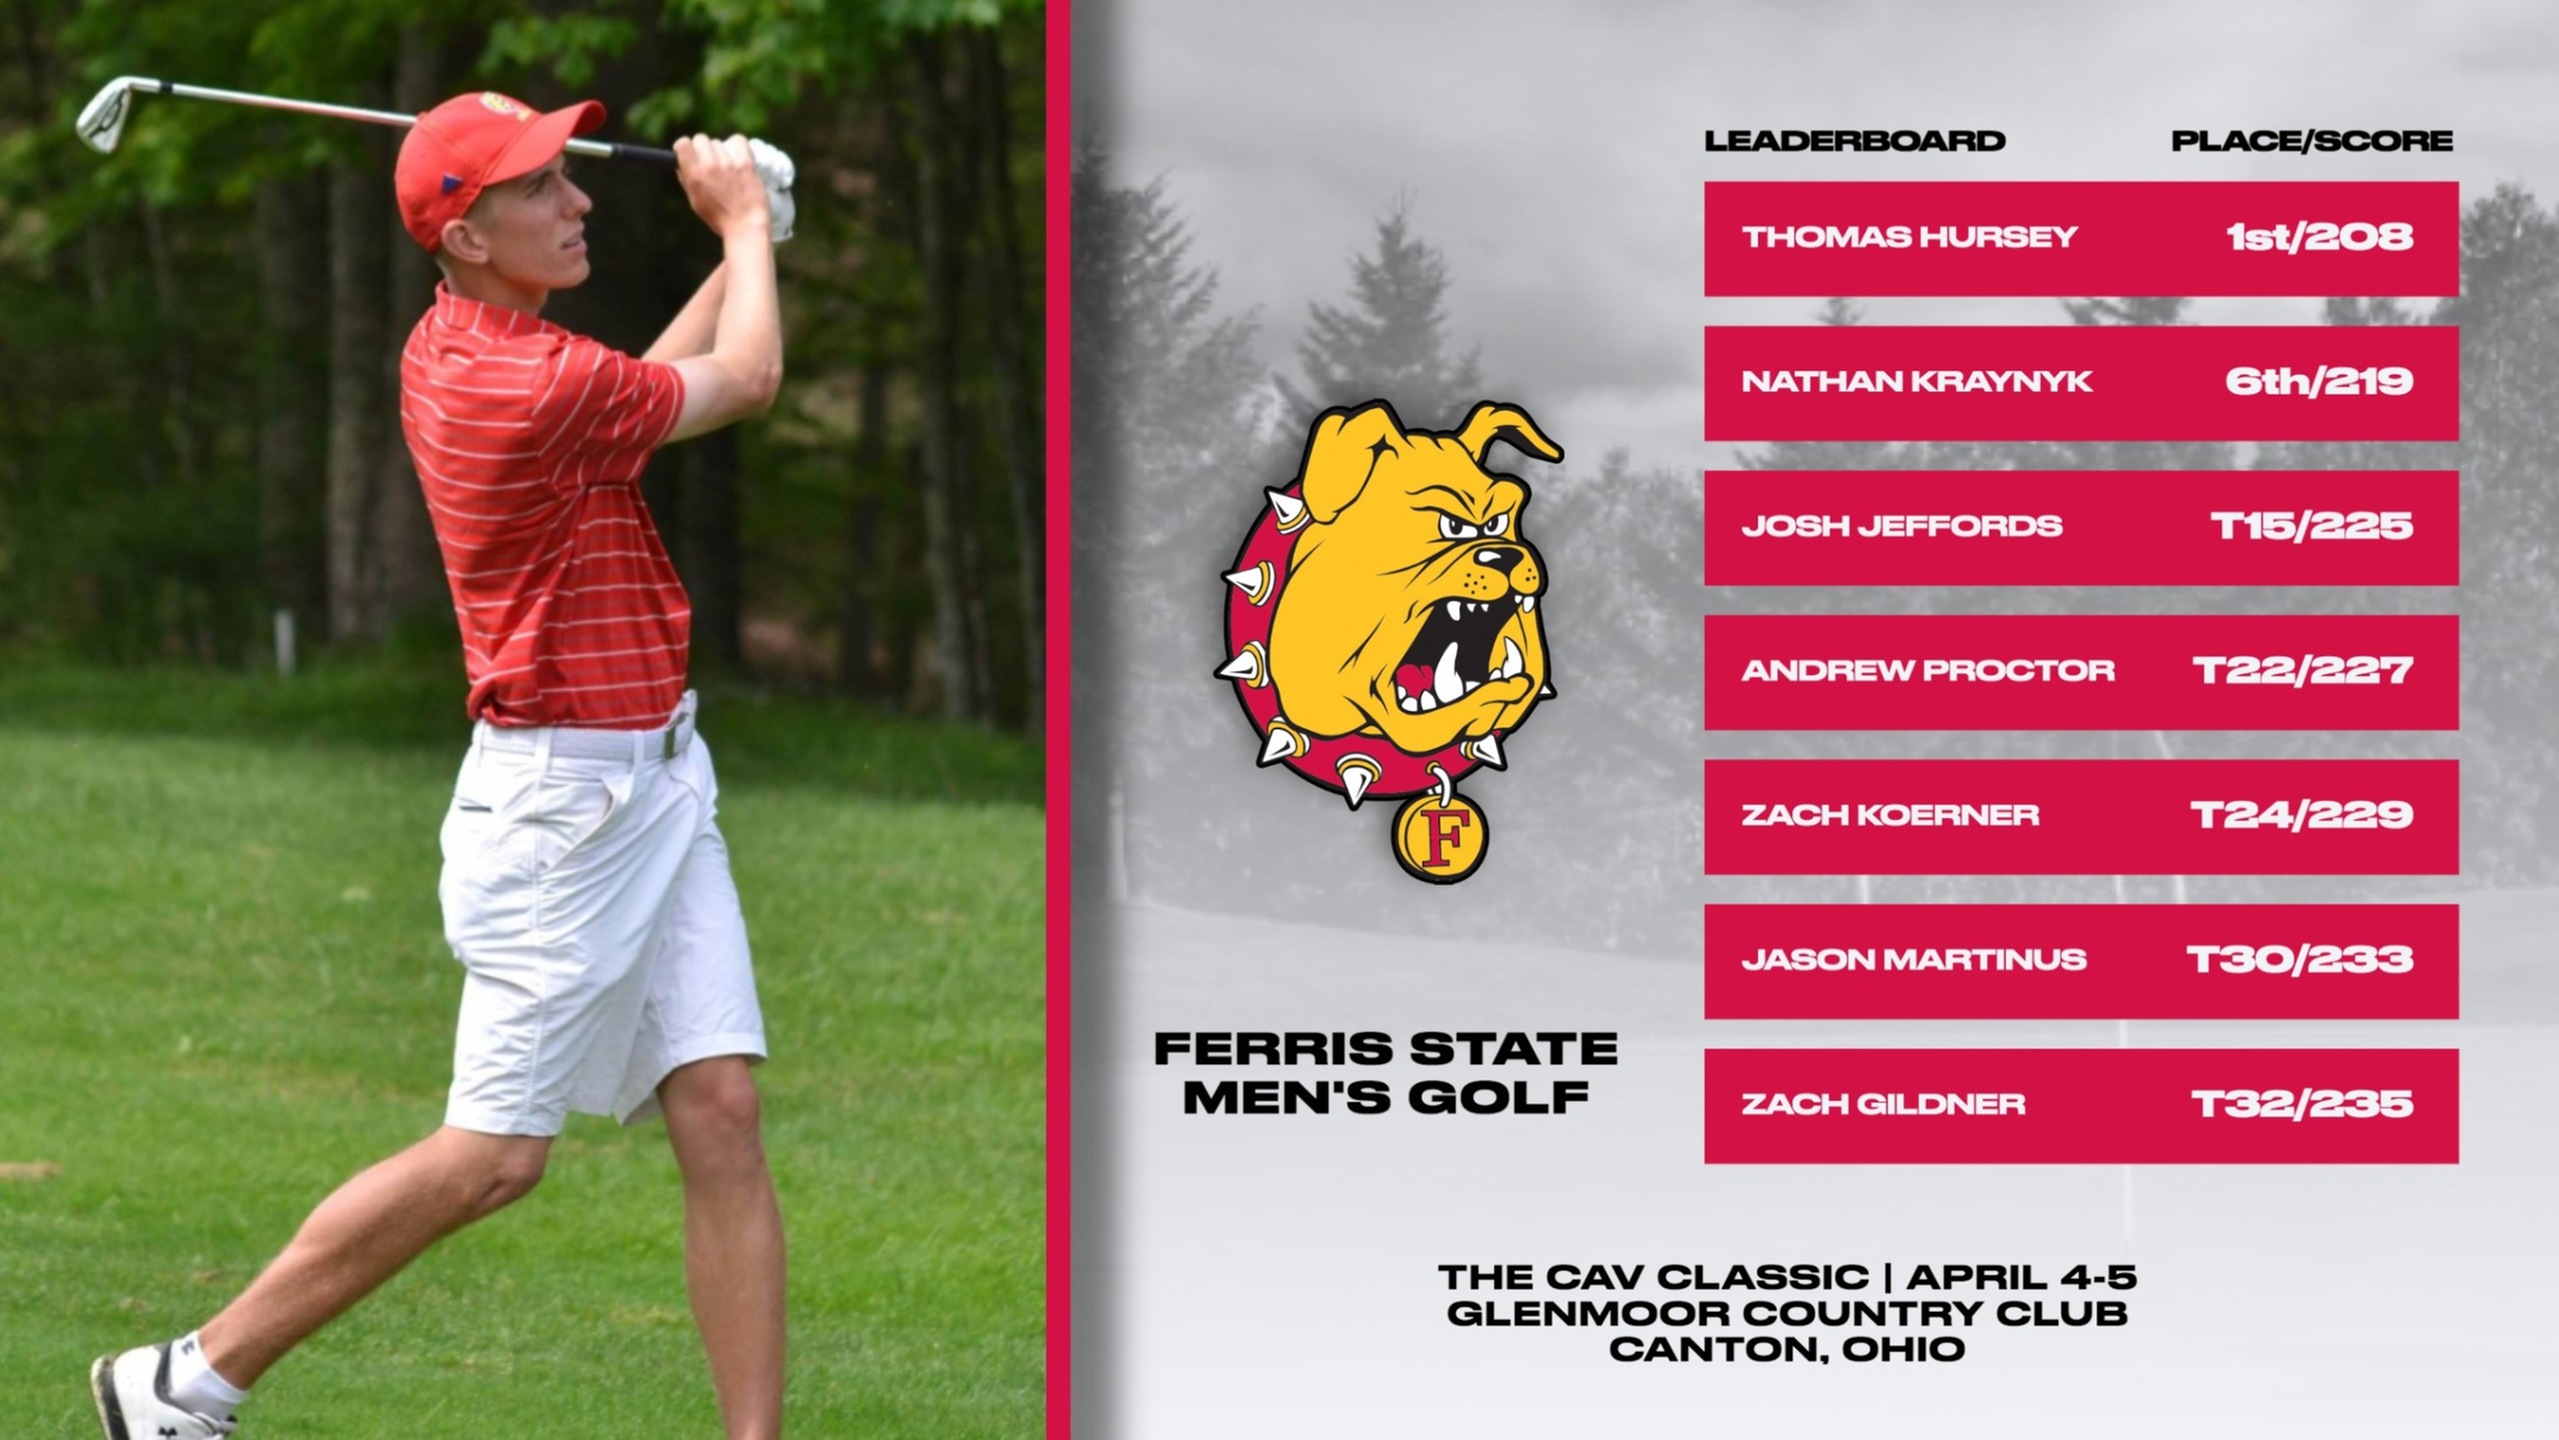 Hursey Wins Medalist Honors As Ferris State Registers Strong Third-Place Finish At The Cav Classic